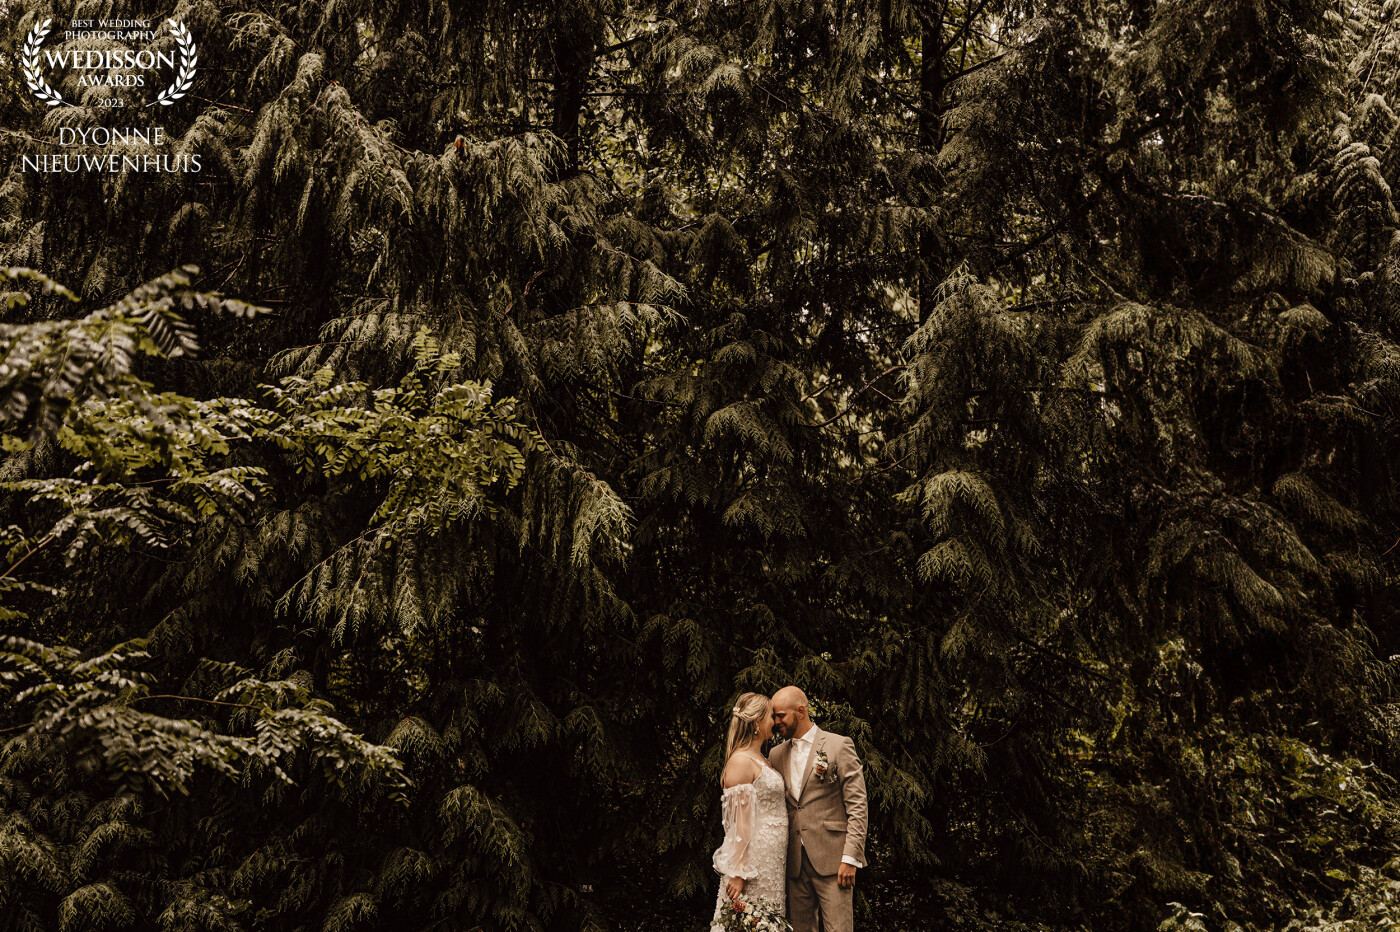 After a whole day of rain, finally wedding photos outside in the woods after dinner. Location Schovenhorst Estate